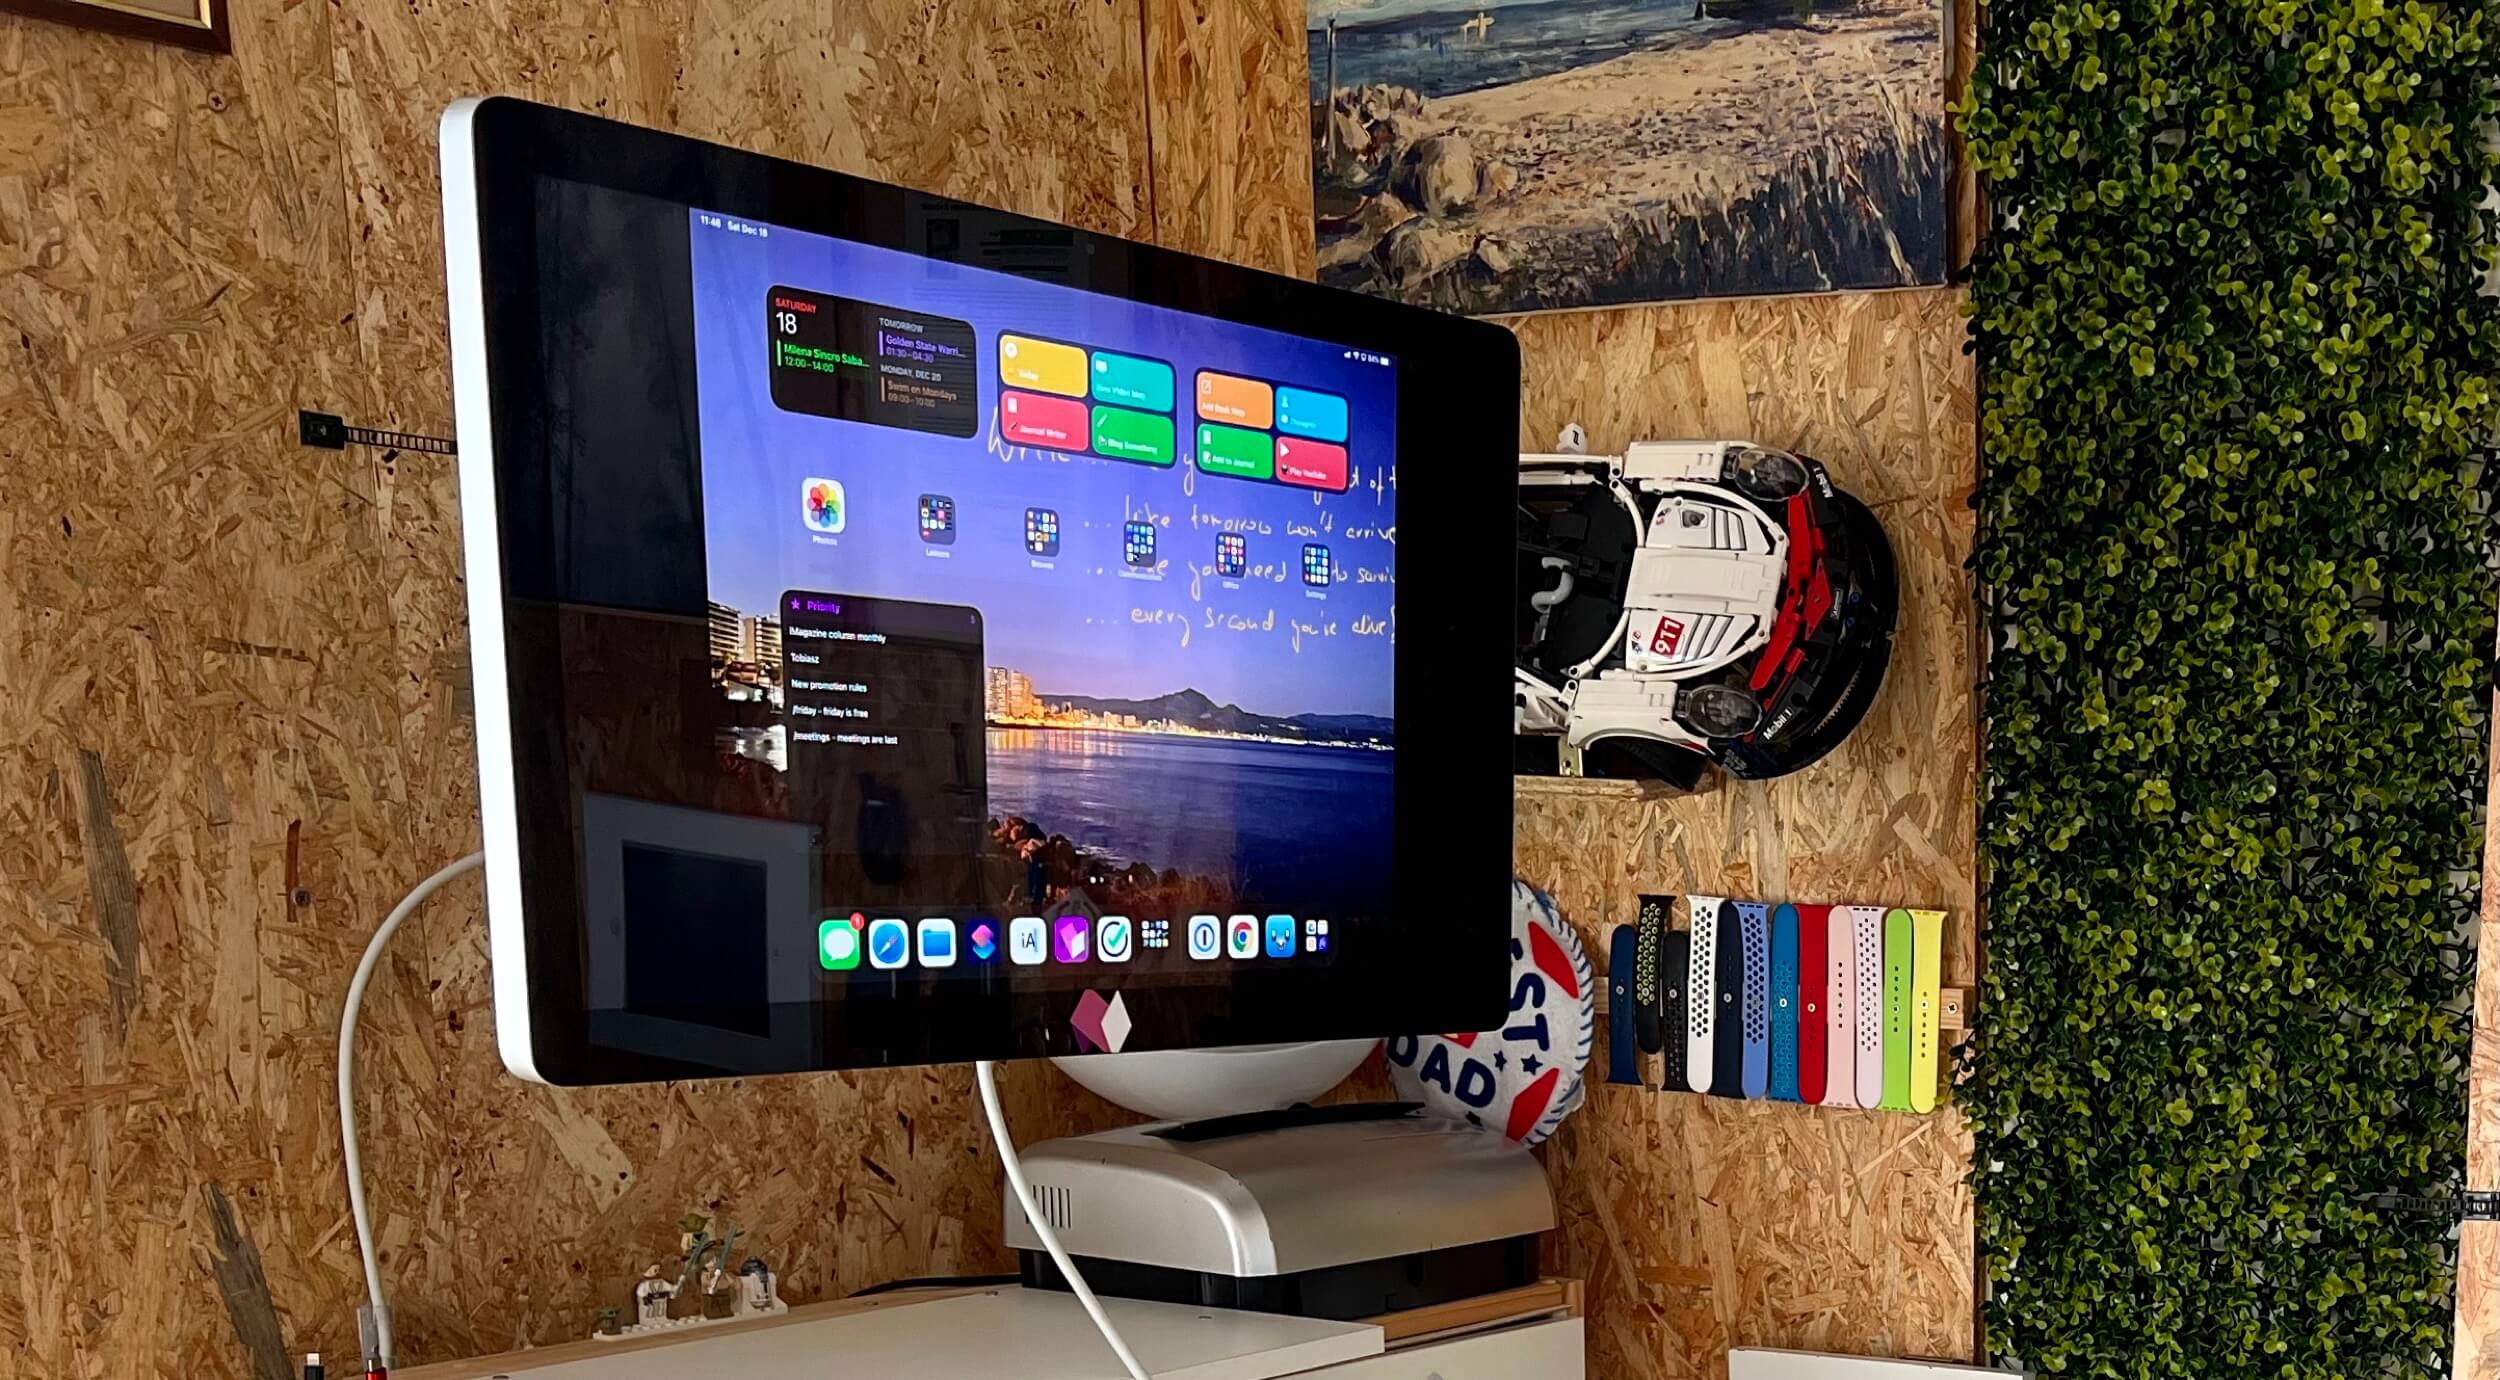 7 lives of a decade-old trusty Apple Thunderbolt Display